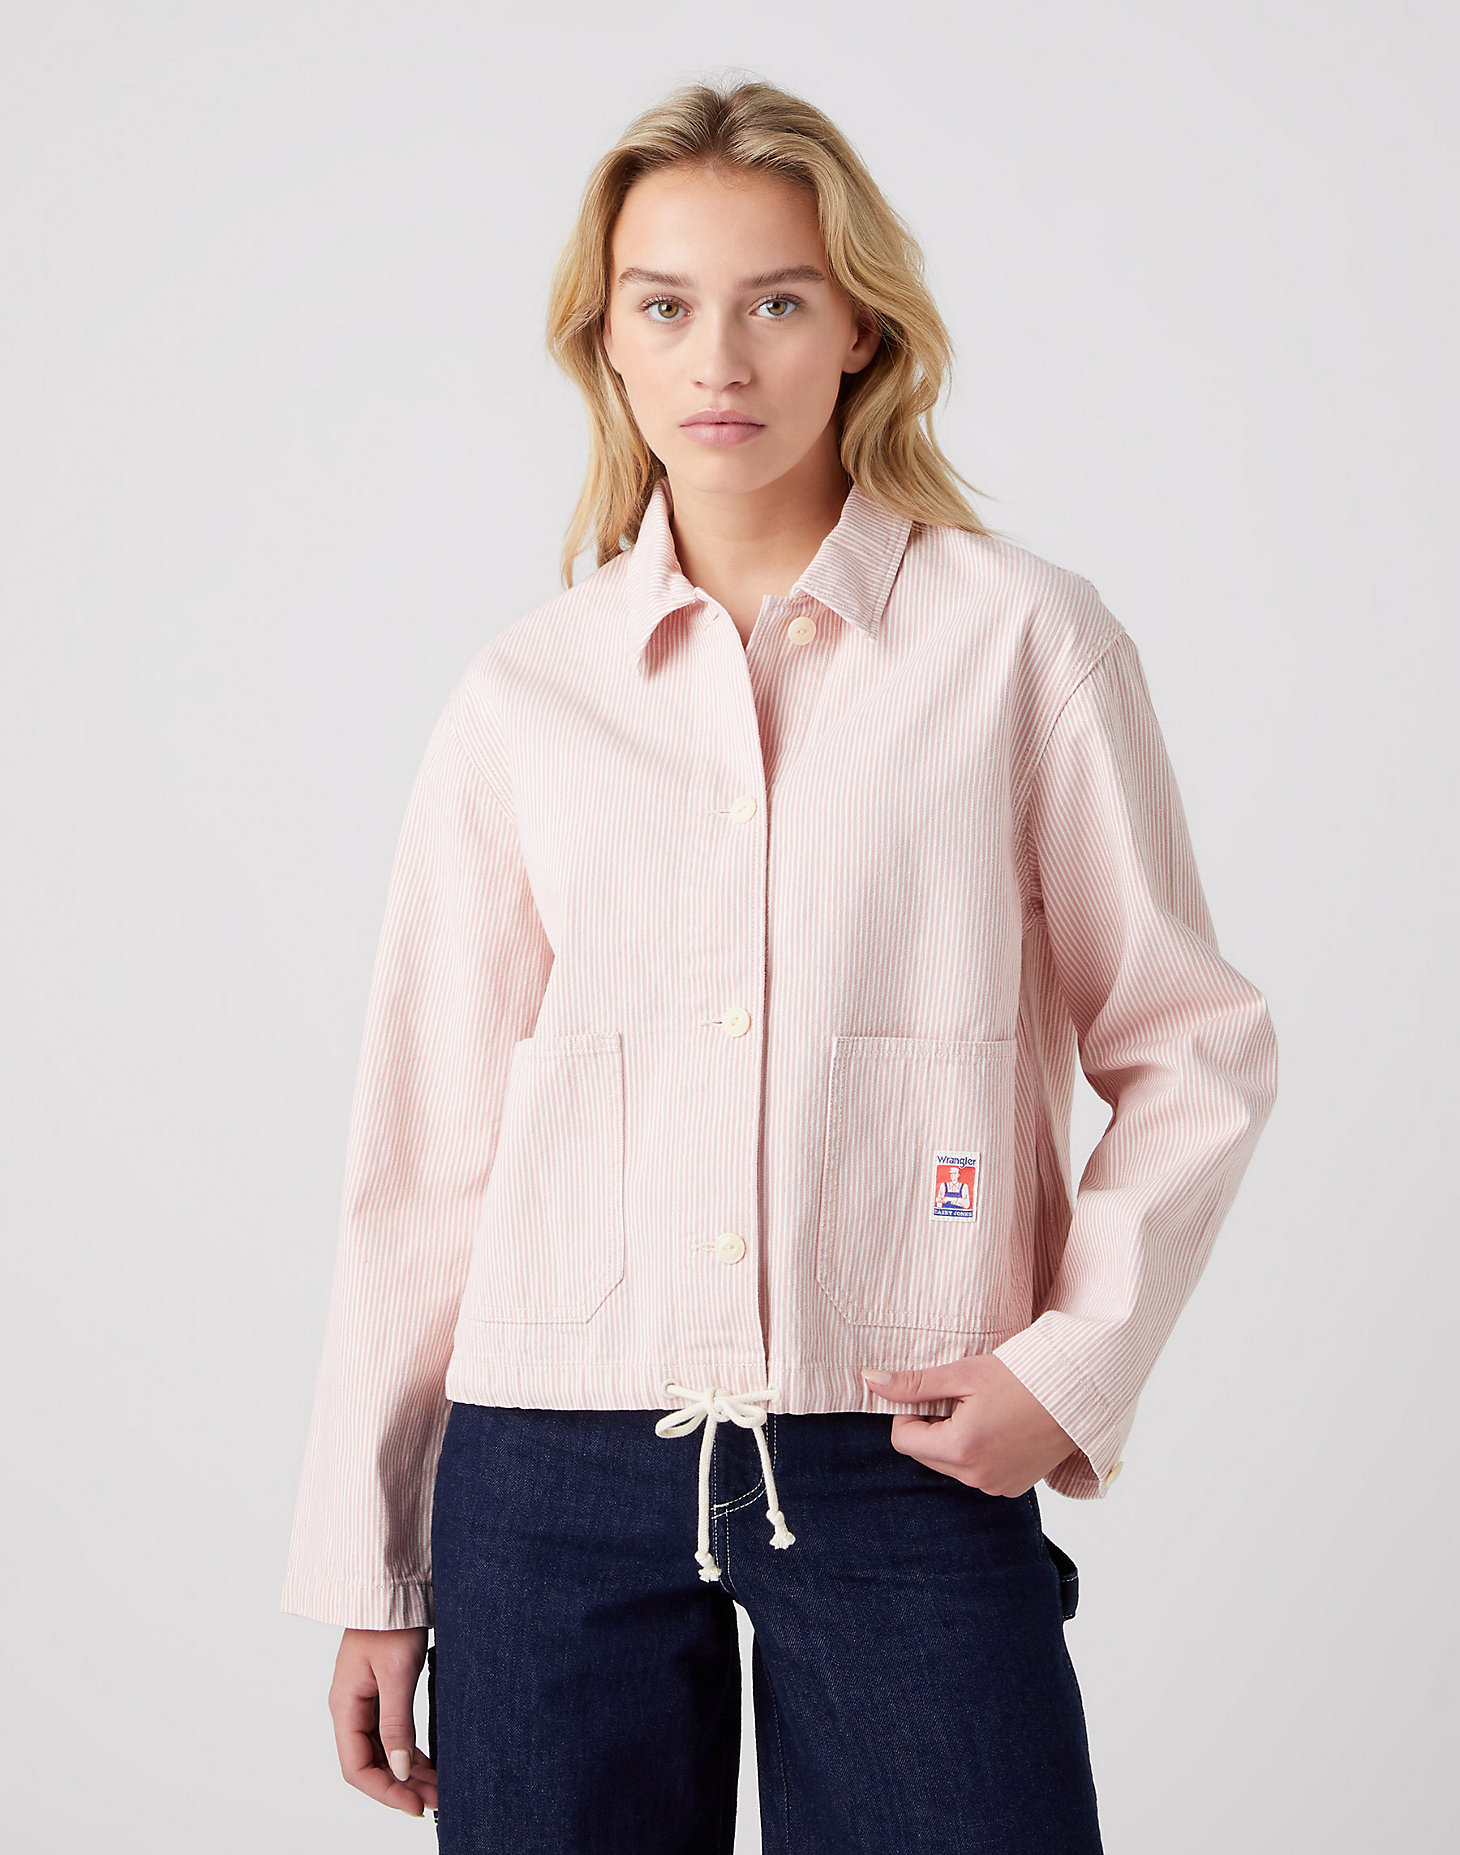 Casey Jones Chore Jacket in Pink Hickory main view